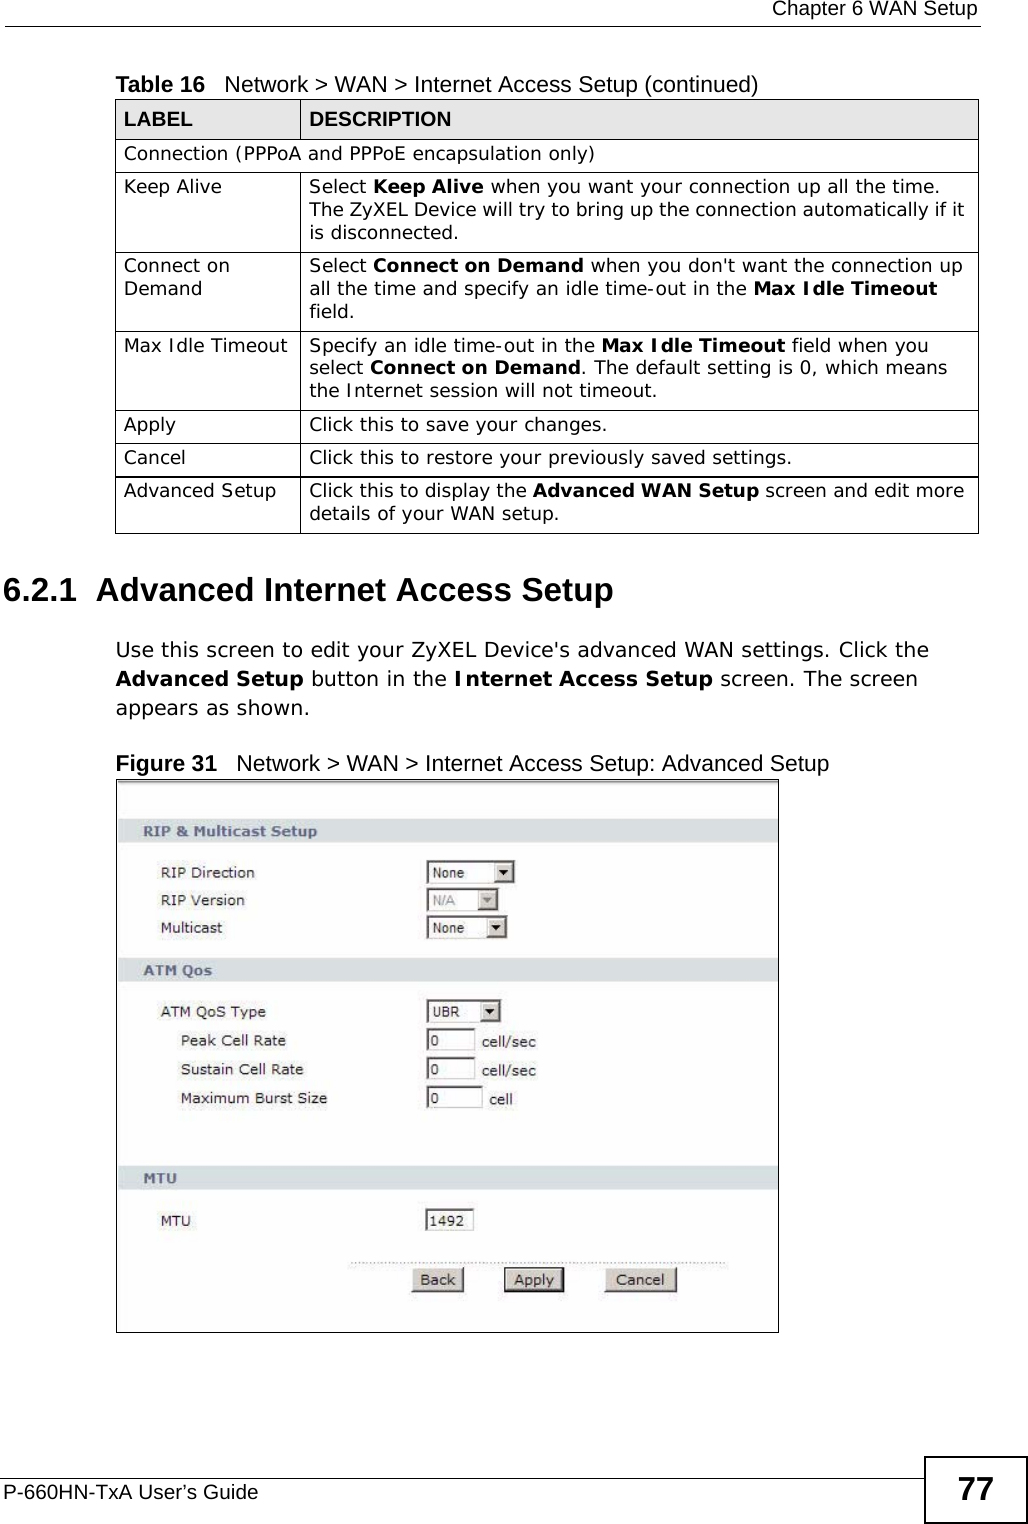  Chapter 6 WAN SetupP-660HN-TxA User’s Guide 776.2.1  Advanced Internet Access Setup Use this screen to edit your ZyXEL Device&apos;s advanced WAN settings. Click the Advanced Setup button in the Internet Access Setup screen. The screen appears as shown.Figure 31   Network &gt; WAN &gt; Internet Access Setup: Advanced SetupConnection (PPPoA and PPPoE encapsulation only)Keep Alive Select Keep Alive when you want your connection up all the time. The ZyXEL Device will try to bring up the connection automatically if it is disconnected.Connect on Demand Select Connect on Demand when you don&apos;t want the connection up all the time and specify an idle time-out in the Max Idle Timeout field.Max Idle Timeout Specify an idle time-out in the Max Idle Timeout field when you select Connect on Demand. The default setting is 0, which means the Internet session will not timeout.Apply Click this to save your changes. Cancel Click this to restore your previously saved settings.Advanced Setup Click this to display the Advanced WAN Setup screen and edit more details of your WAN setup.Table 16   Network &gt; WAN &gt; Internet Access Setup (continued)LABEL DESCRIPTION